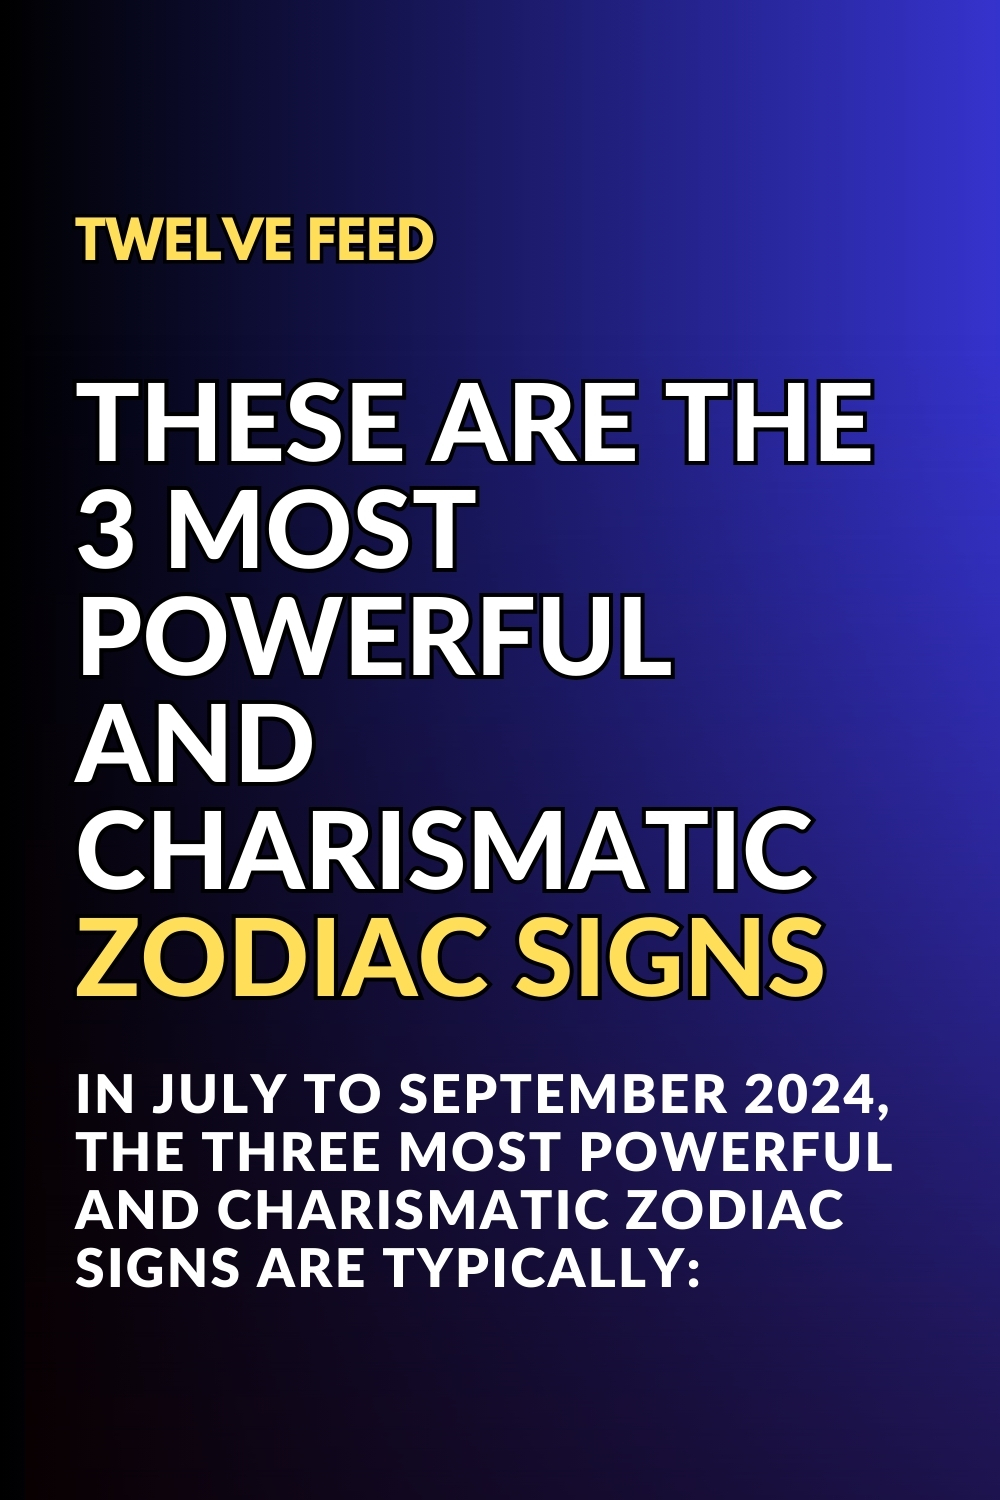 These Are The 3 Most Powerful And Charismatic Zodiac Signs From July To September 2024